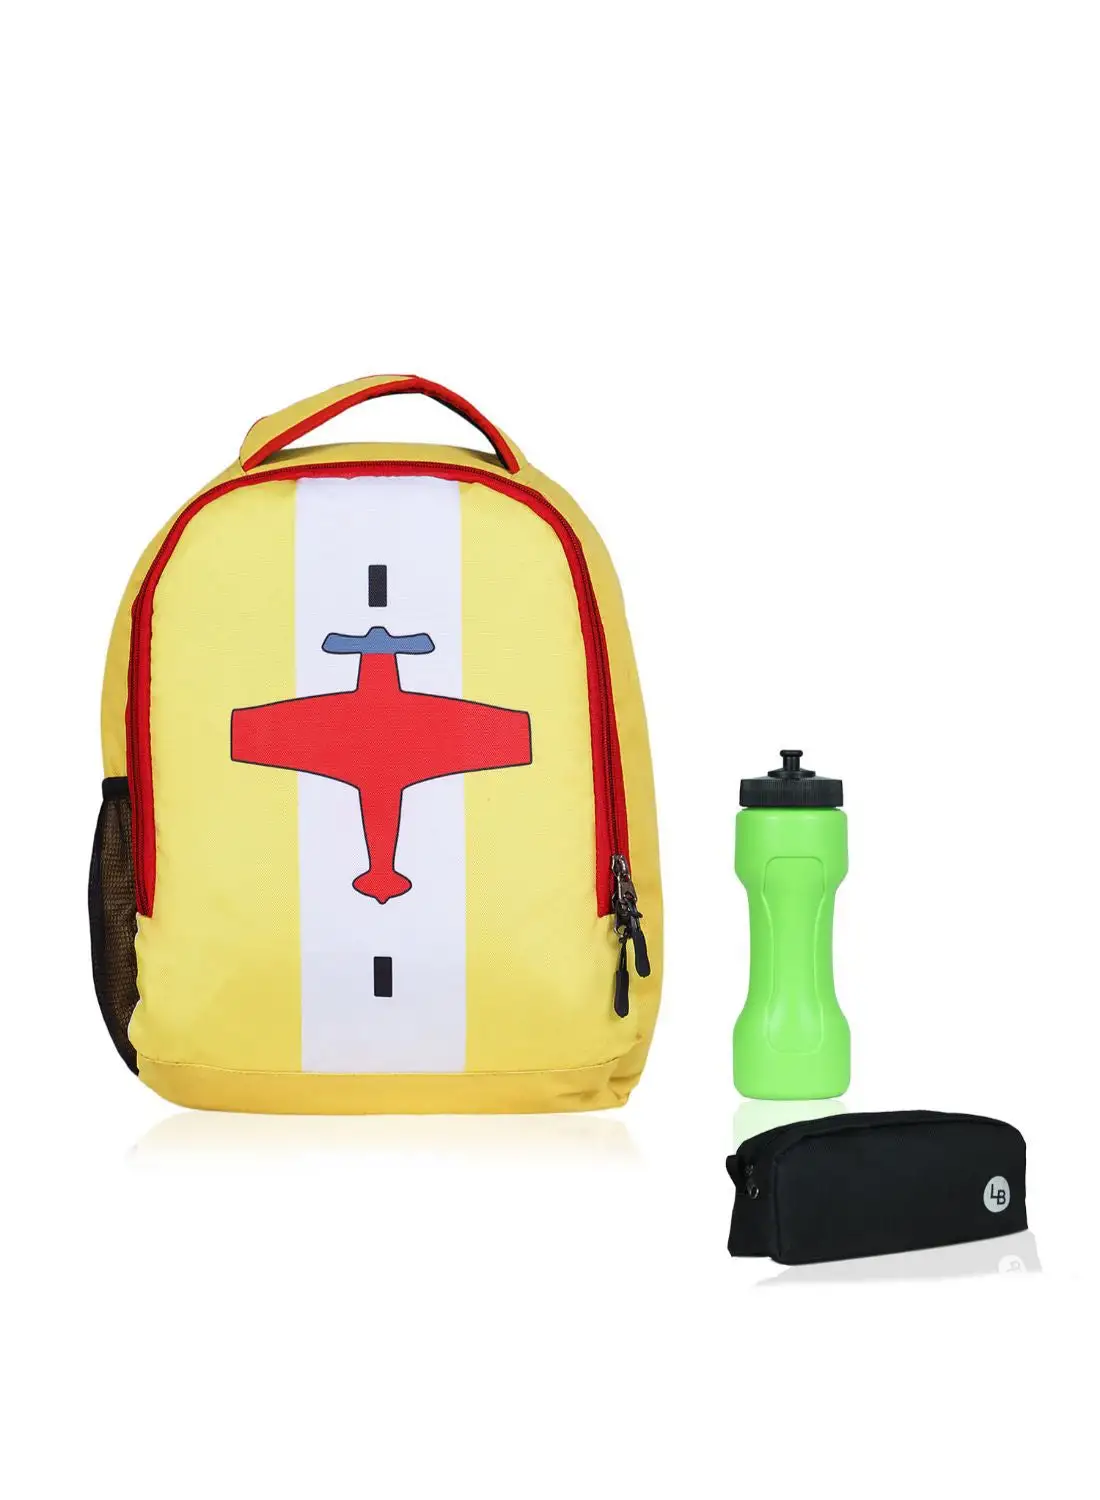 LIONBONE Aeroplane printed Polyester Kids Backpack with zip closure Ideal for 4-6 years age group, Plastic Sipper And Polyester Pouch Yellow